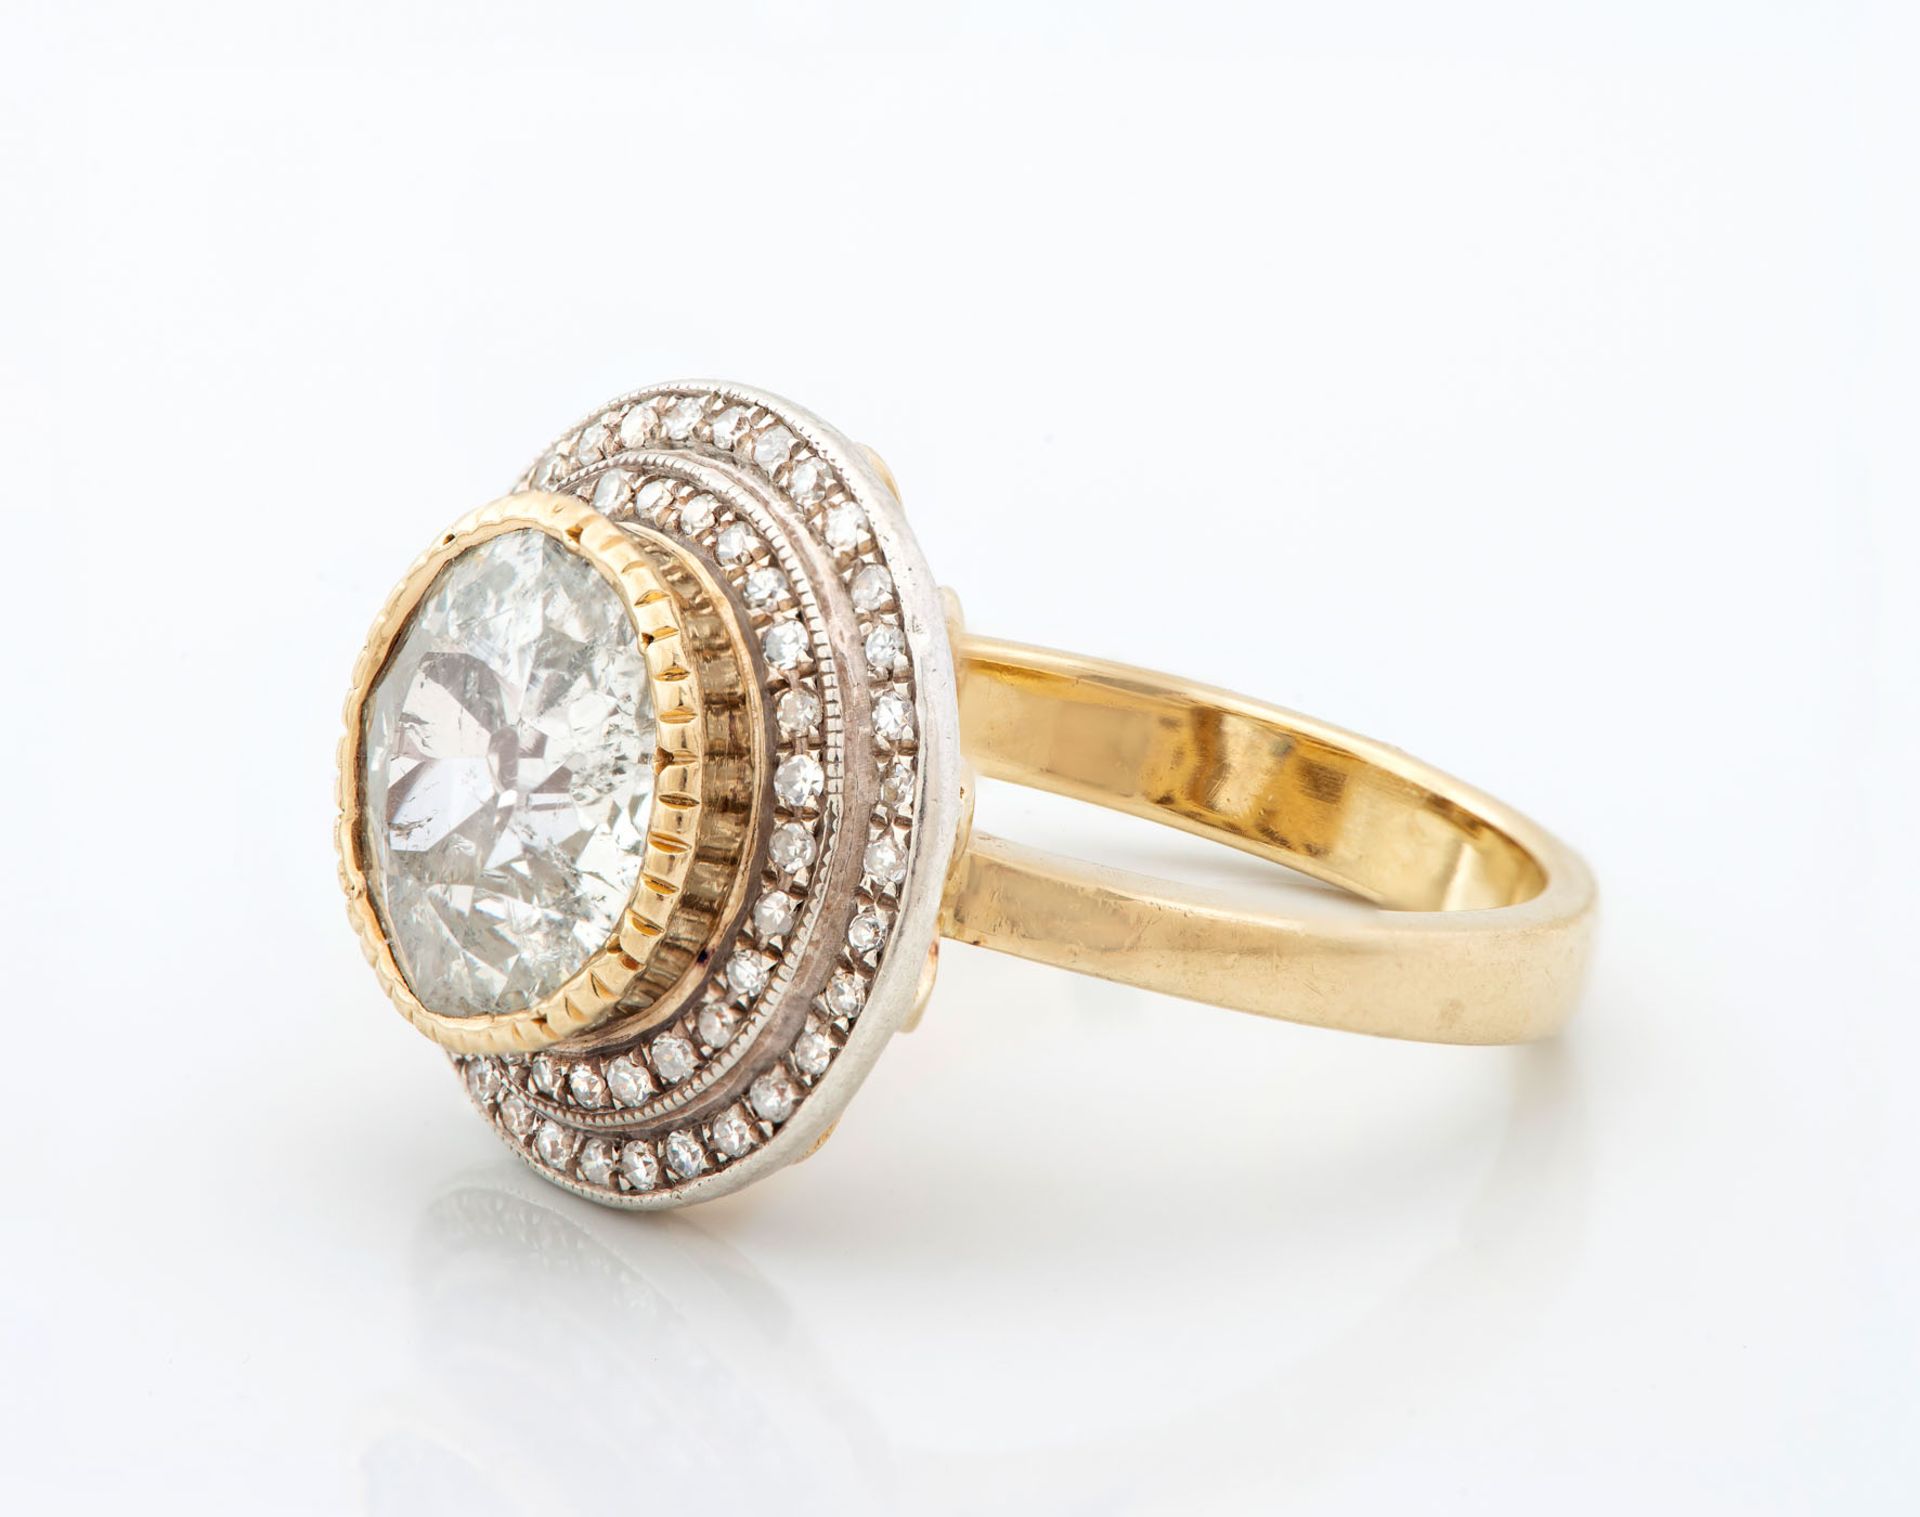 An 18K Two Tone Gold and Diamond Ring - Image 2 of 3